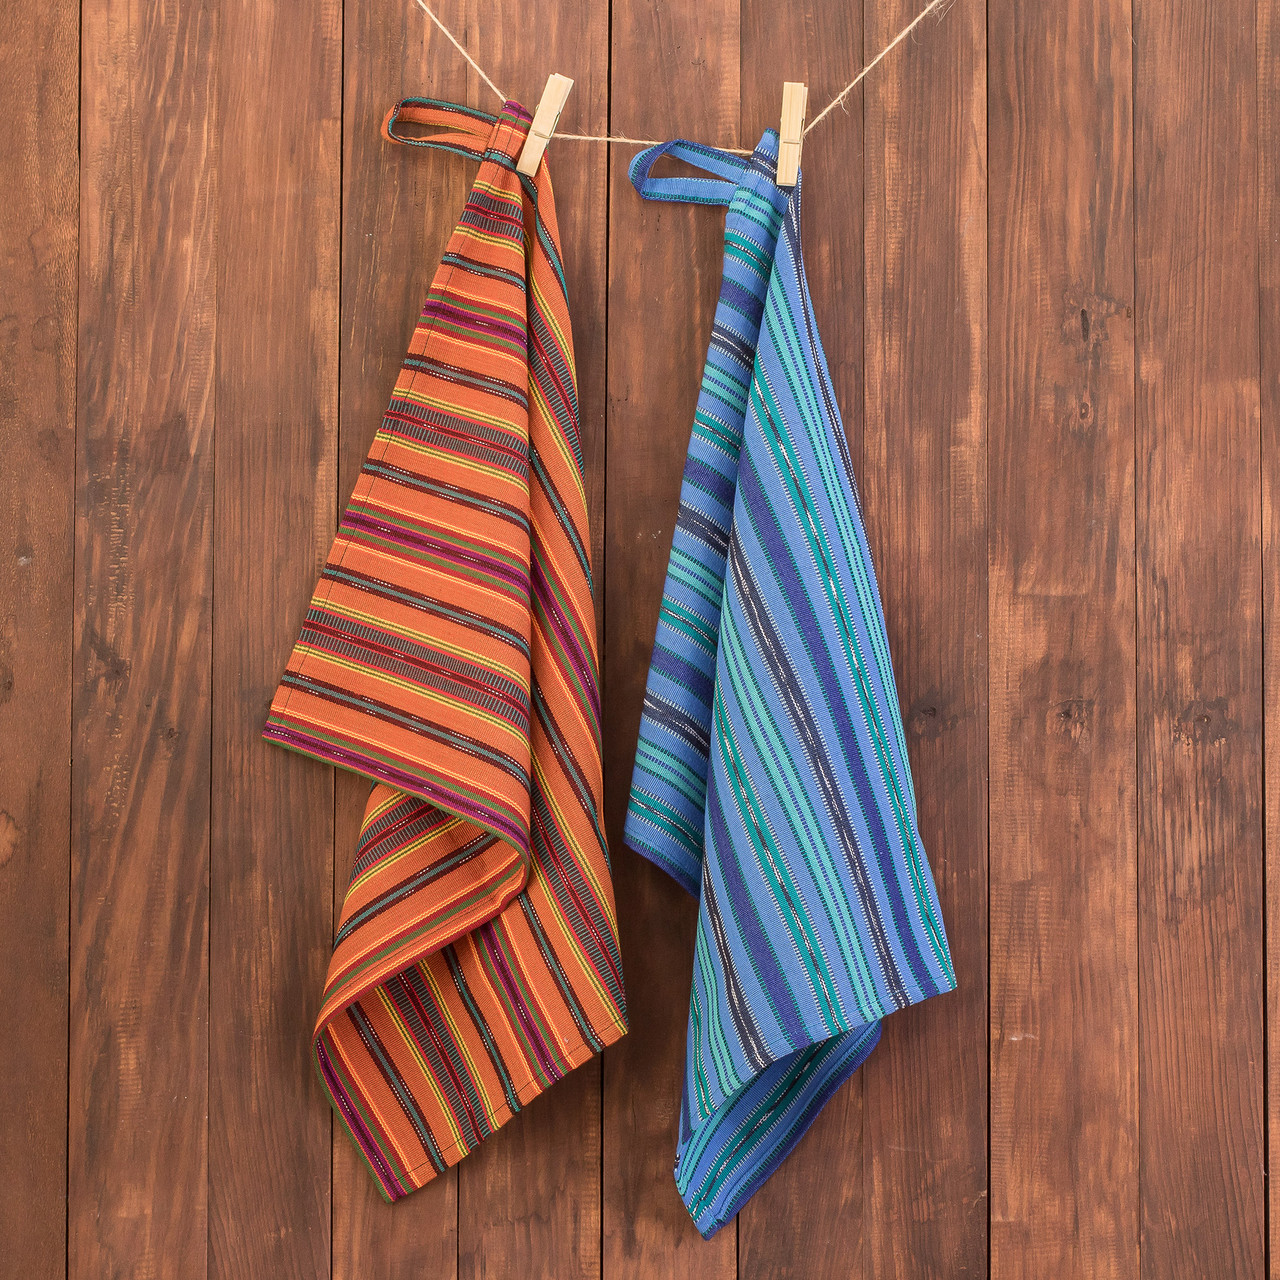 Pair of Striped Cotton Dish Towels Hand-Woven in Guatemala - Kitchen Love